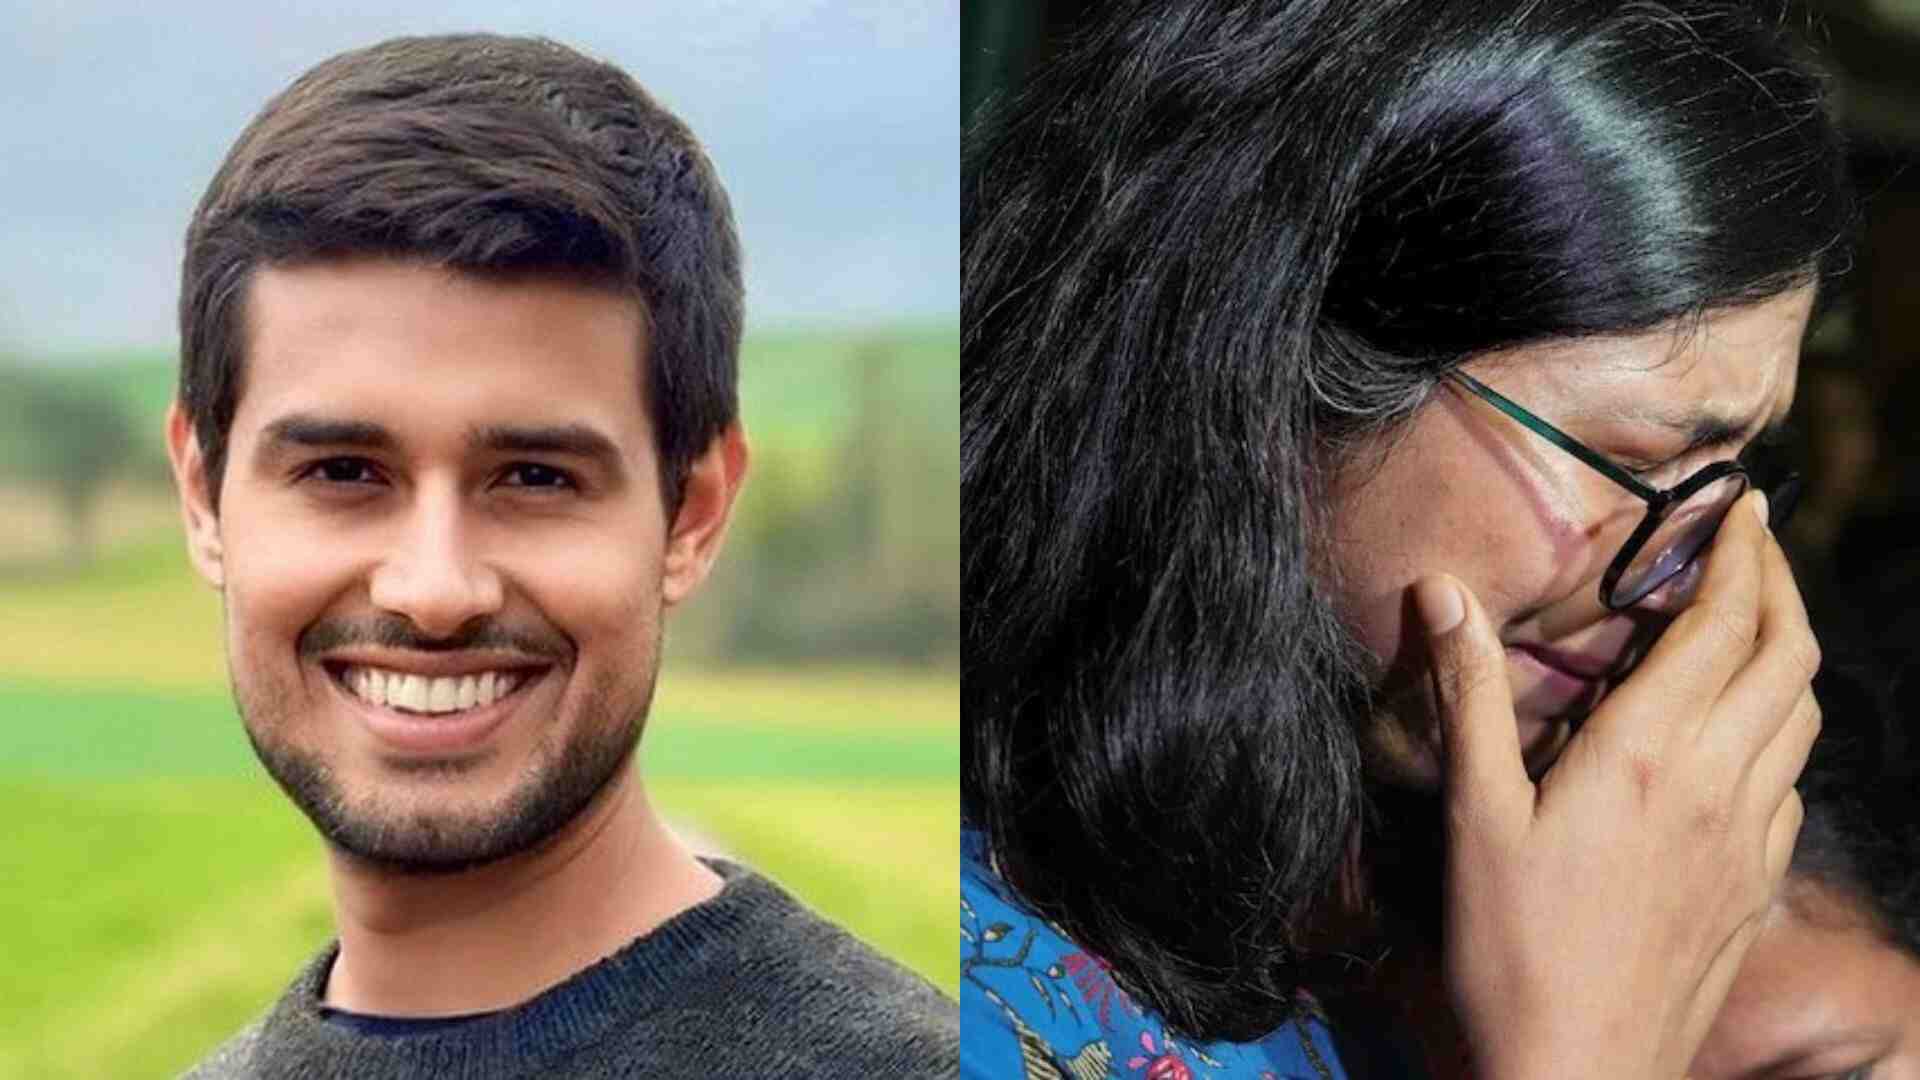 YouTuber Dhruv Rathee Responds to Swati Maliwal’s ‘Death Threat’ Allegations